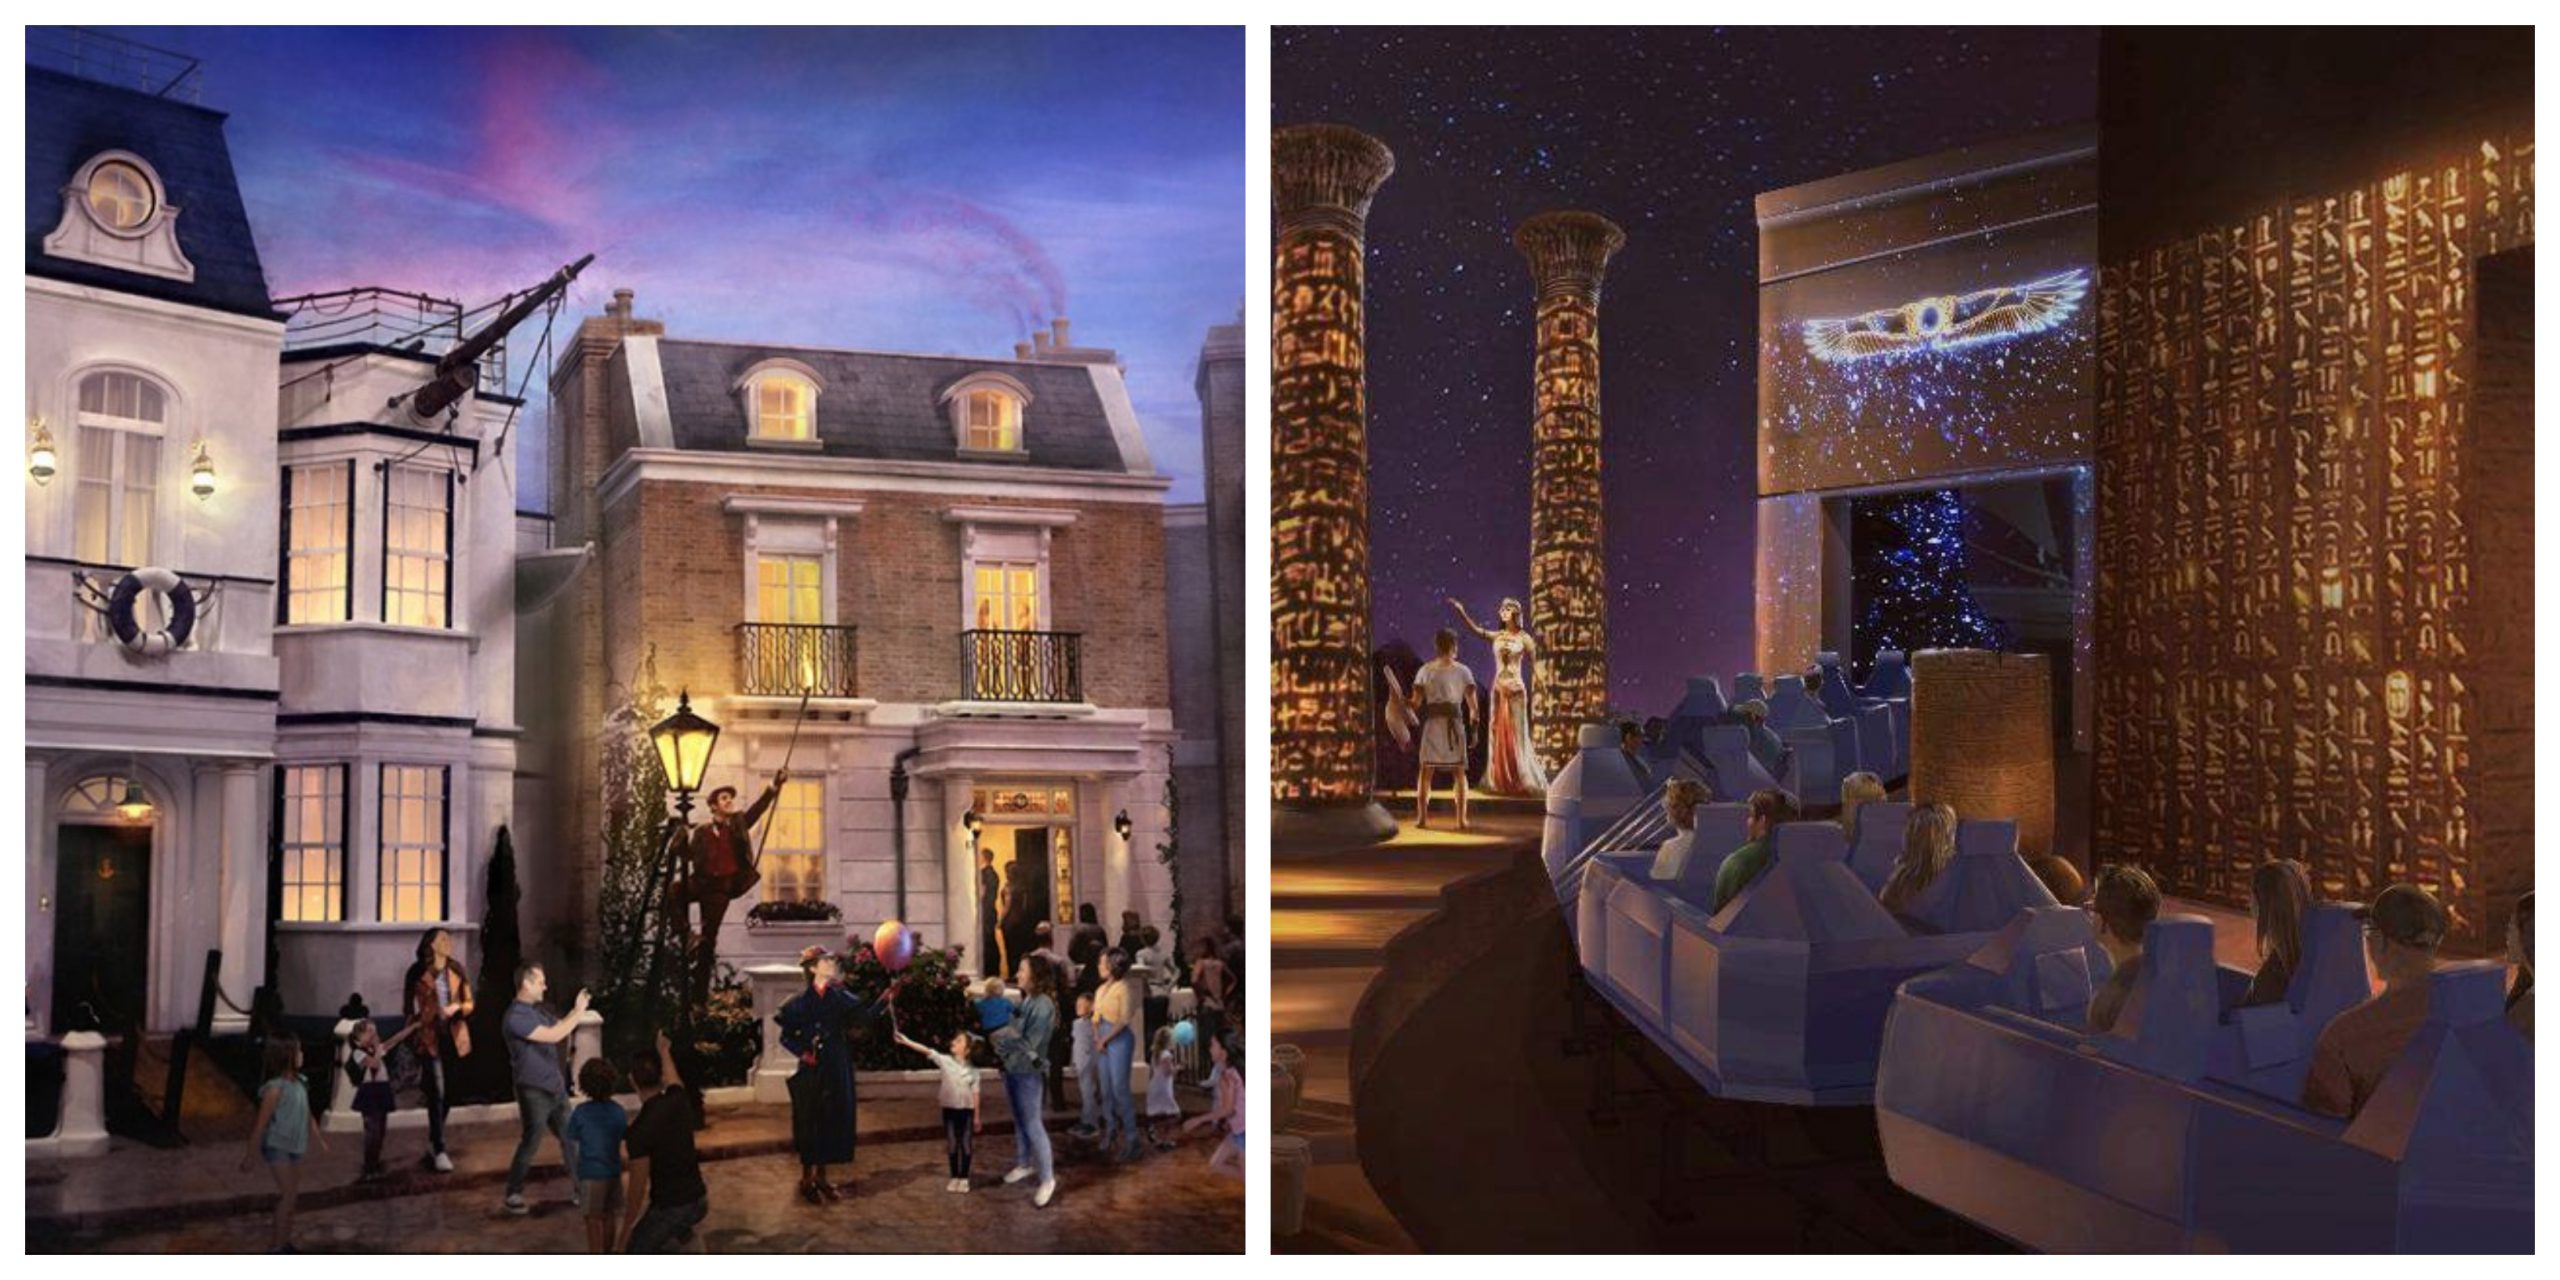 Mary Poppins Attraction and Spaceship Earth Refurbishment put on hold